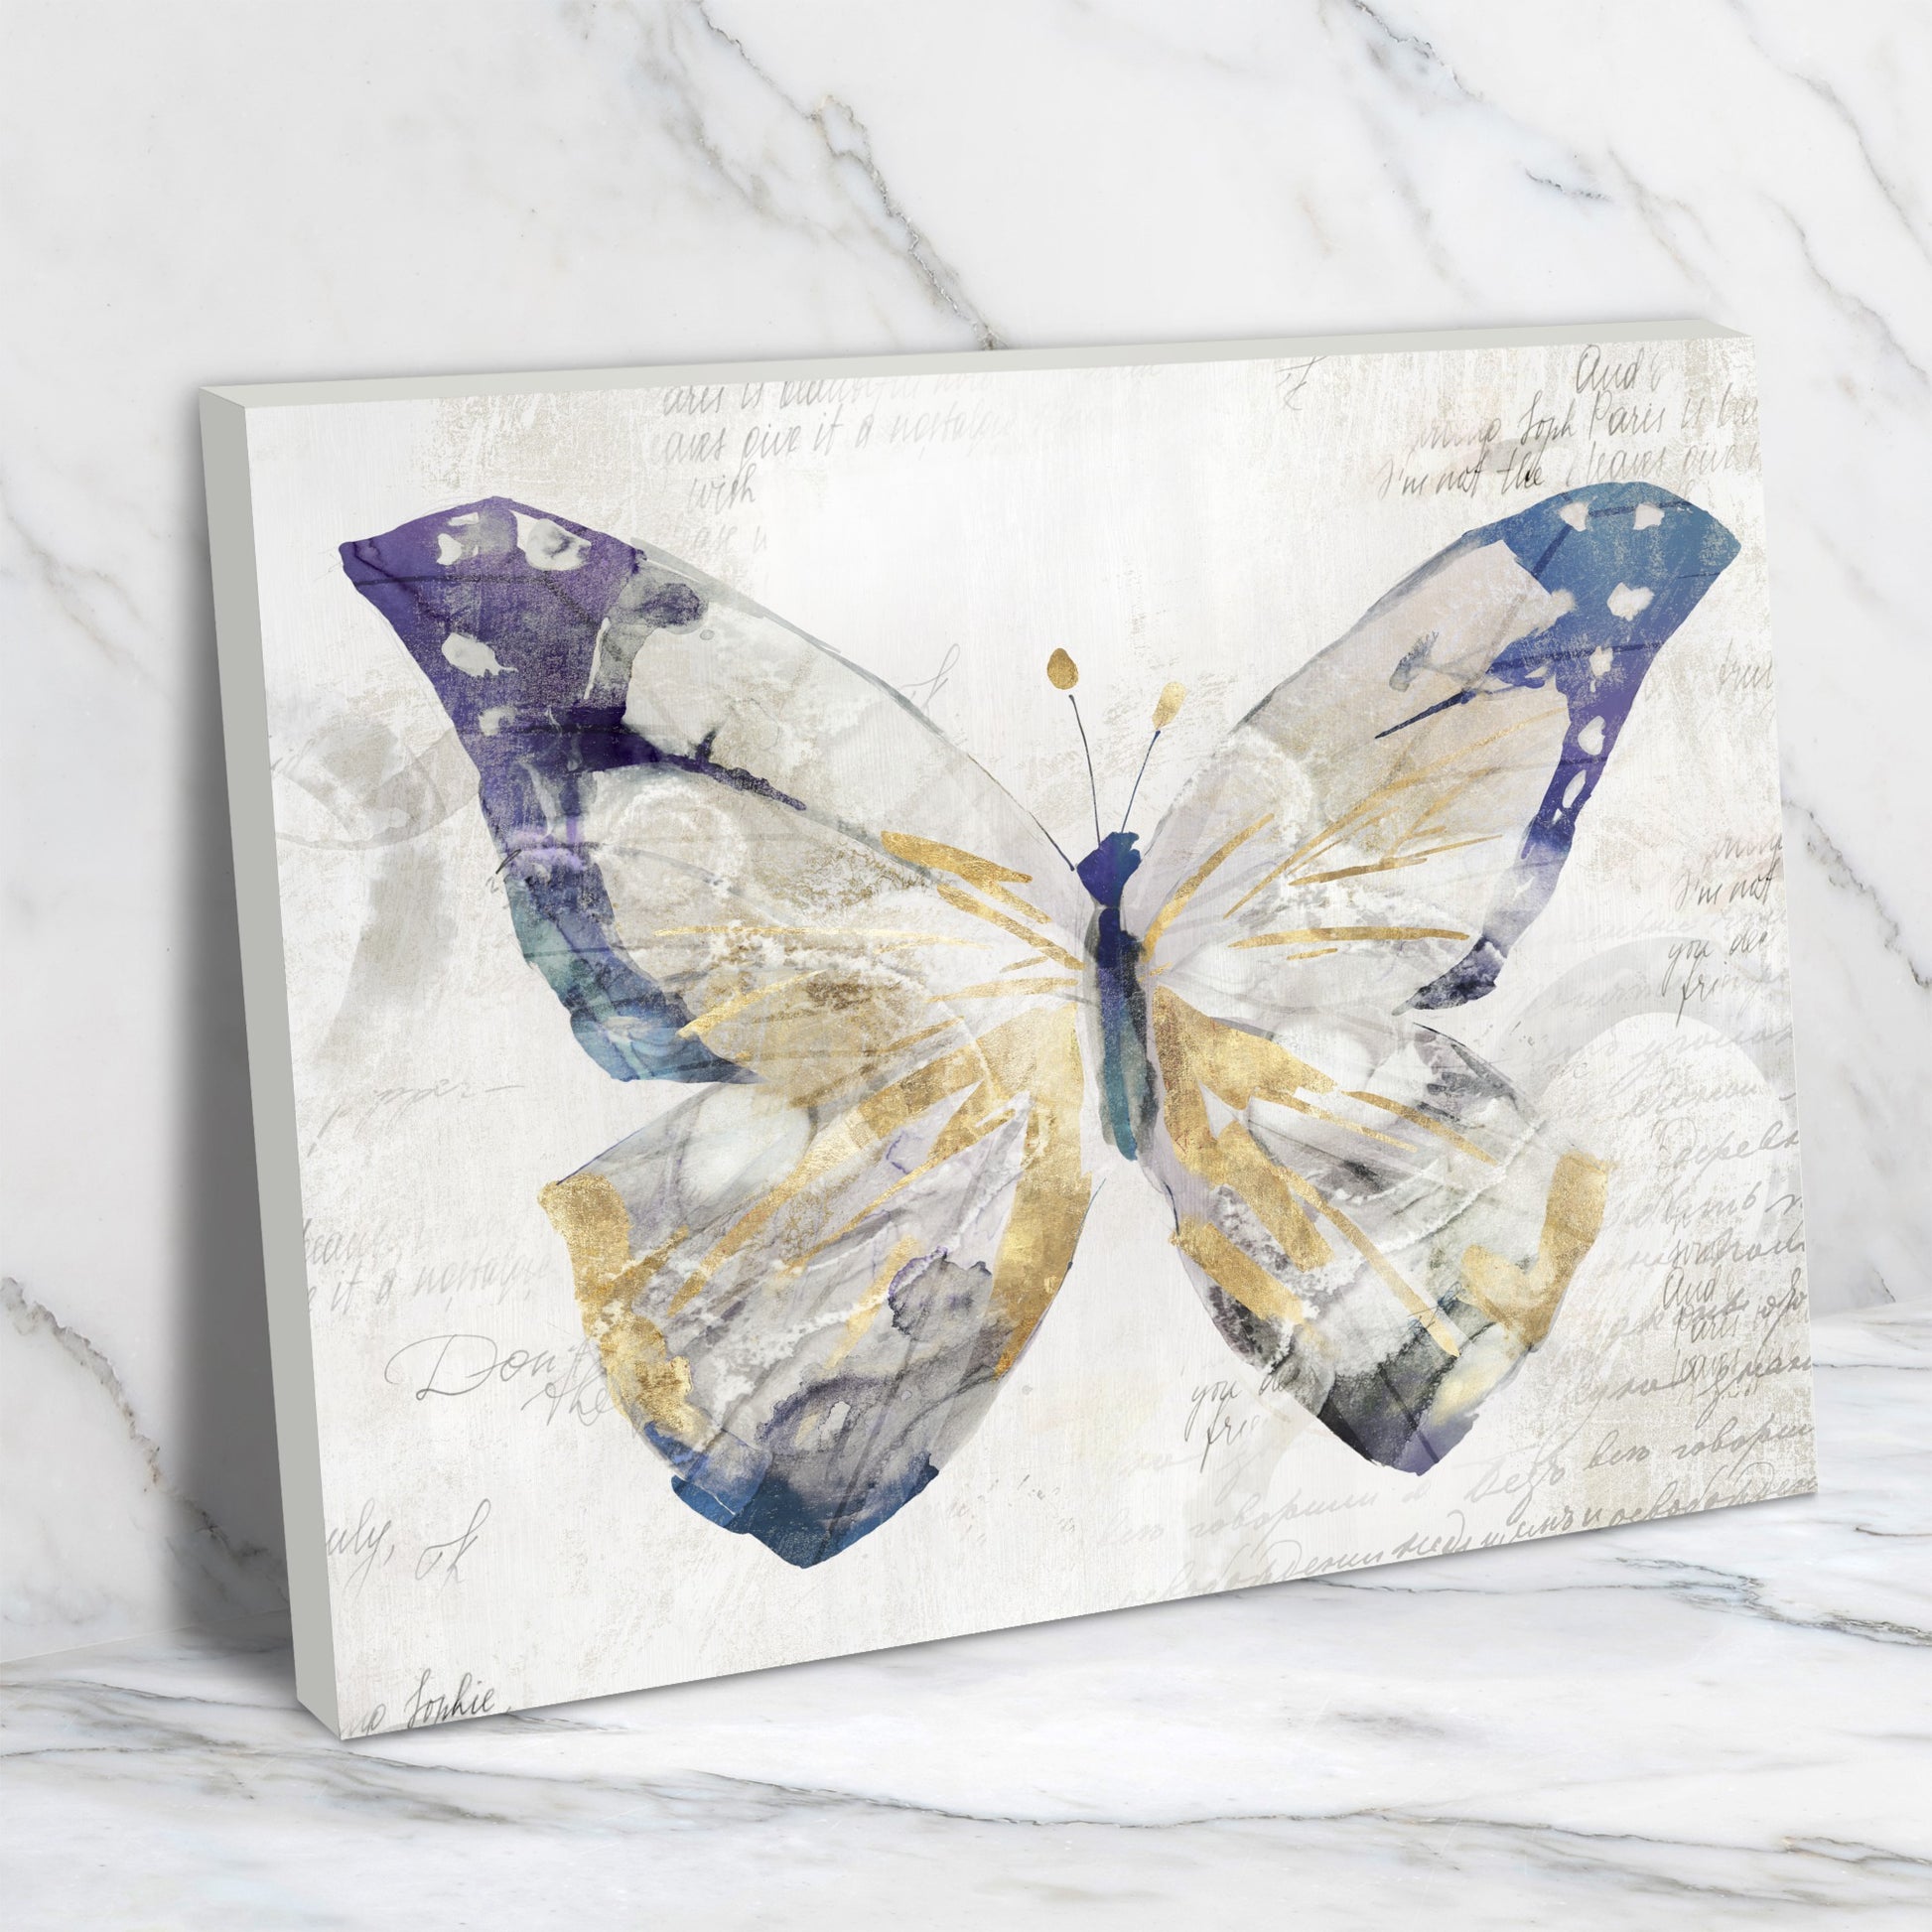 Butterfly Effect I by PI Creative Art - Wrapped Canvas - Americanflat